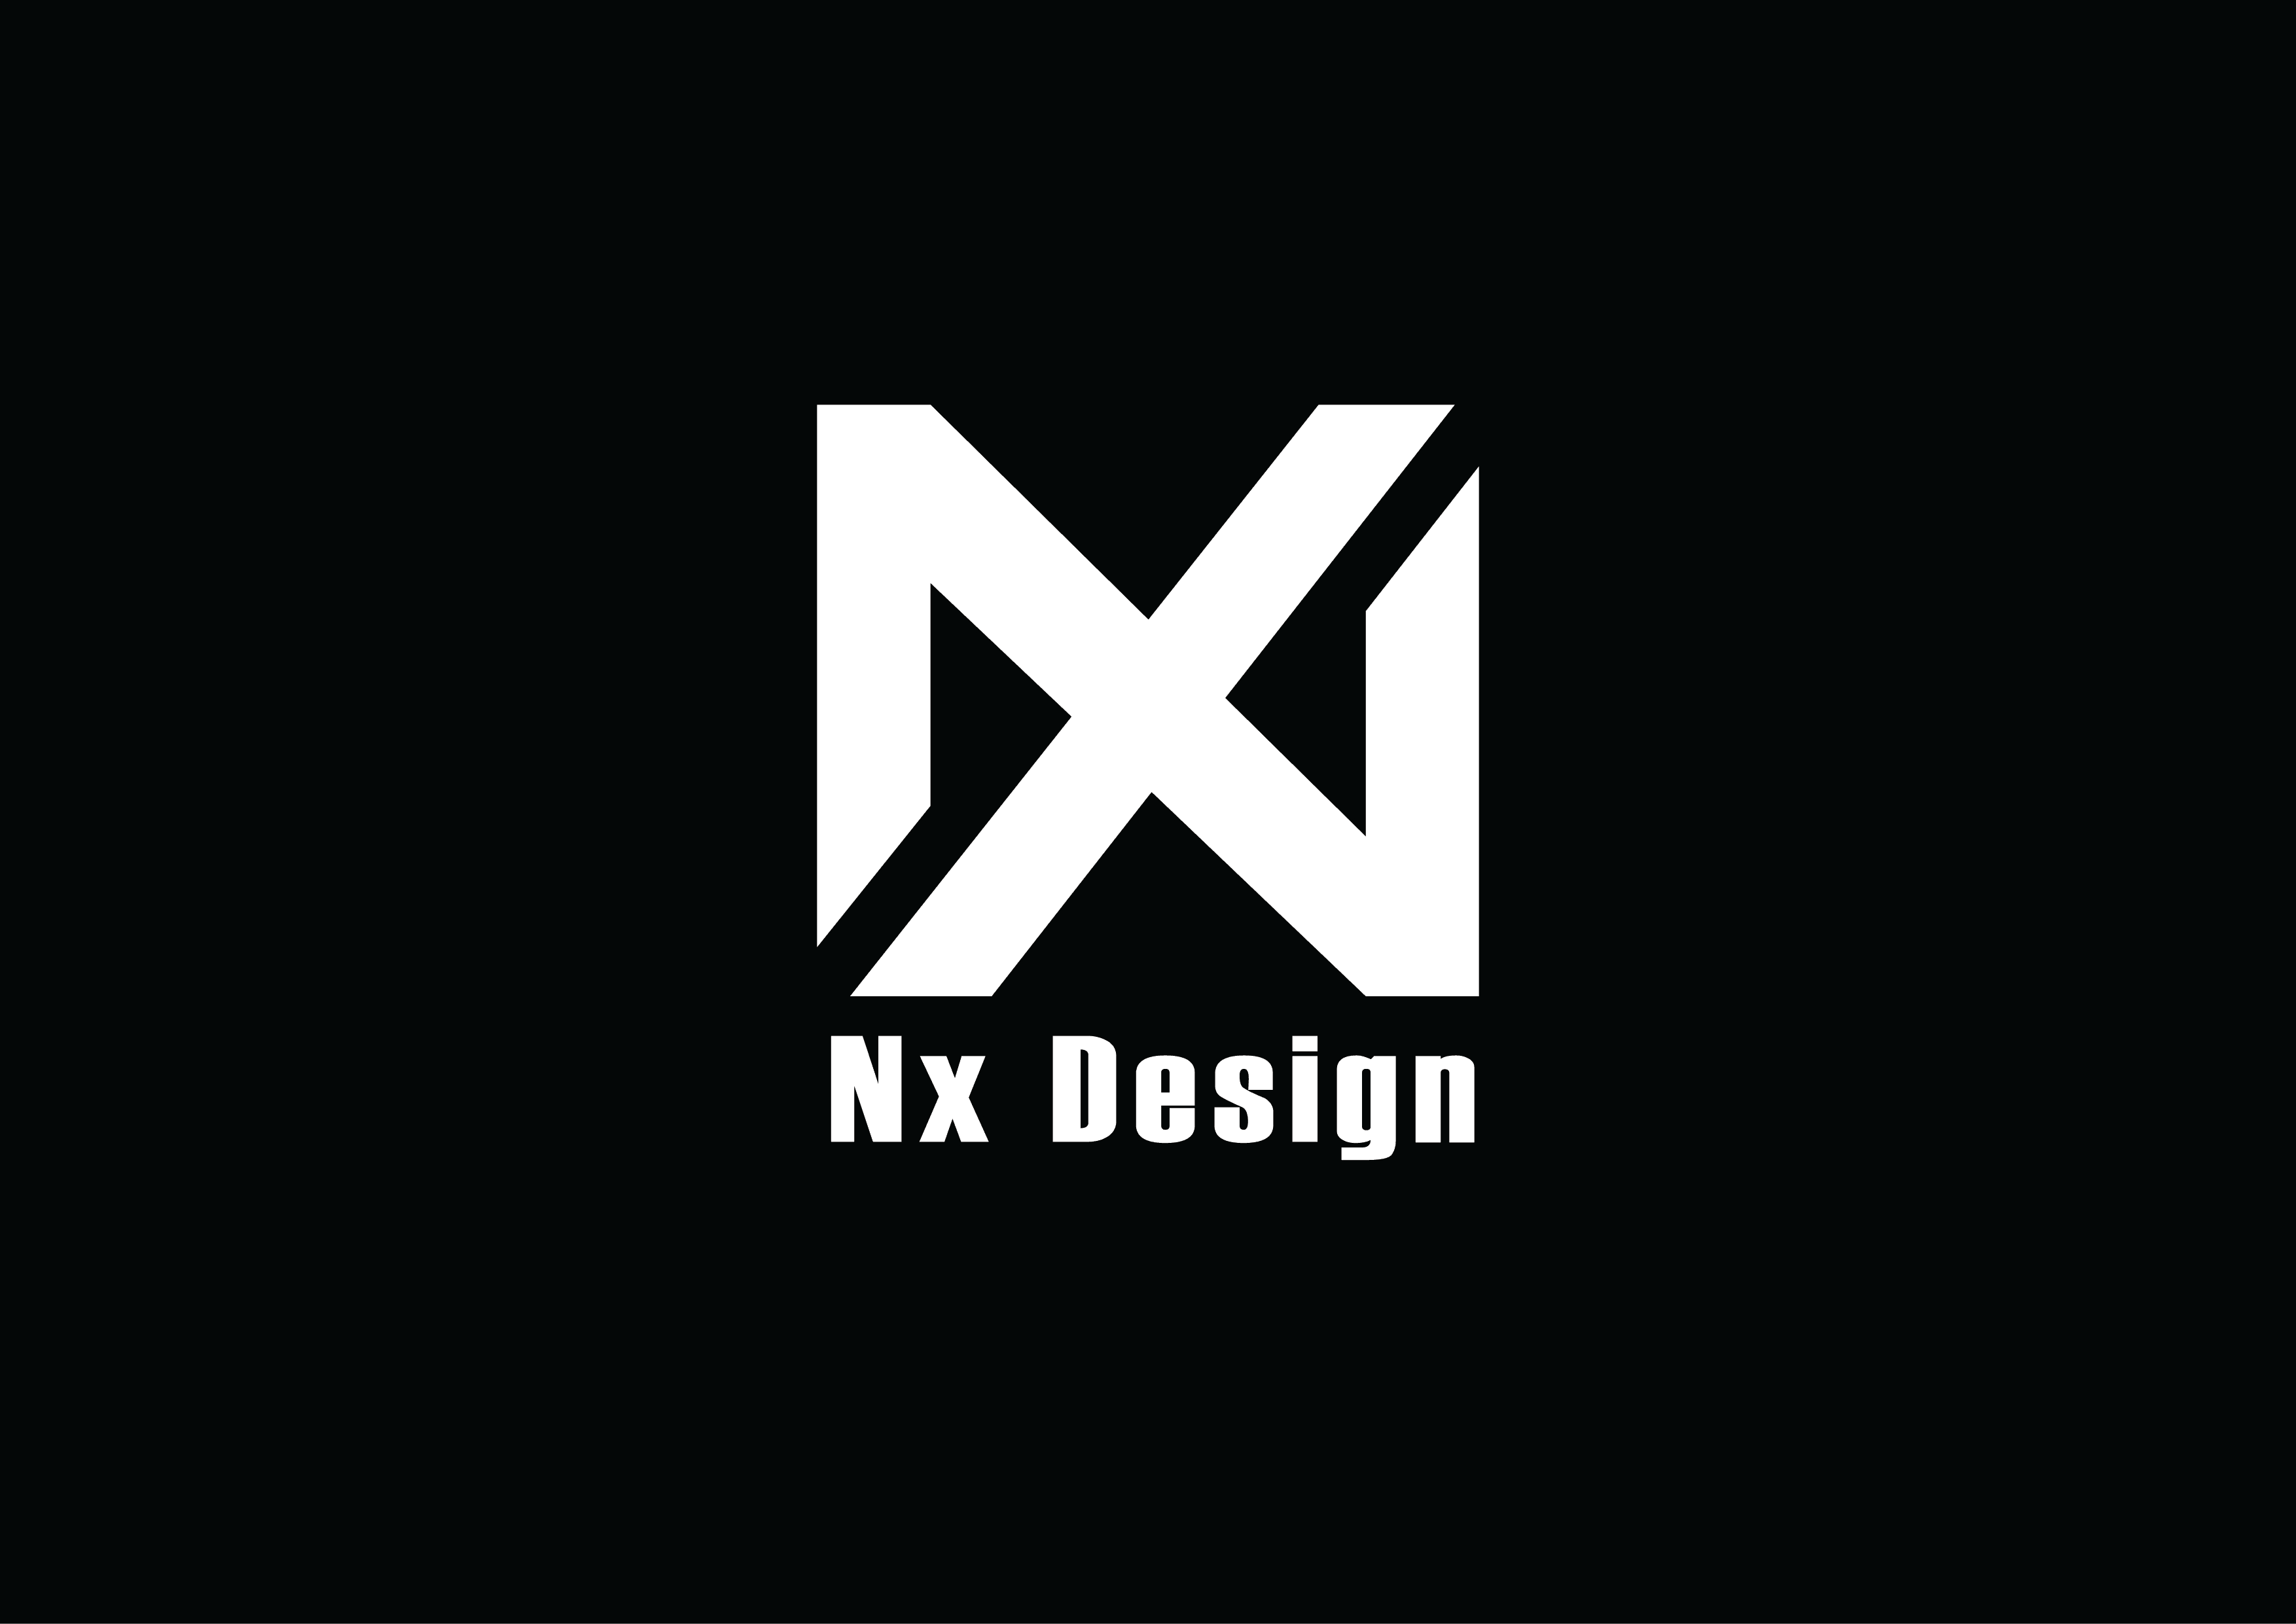 NxDesign